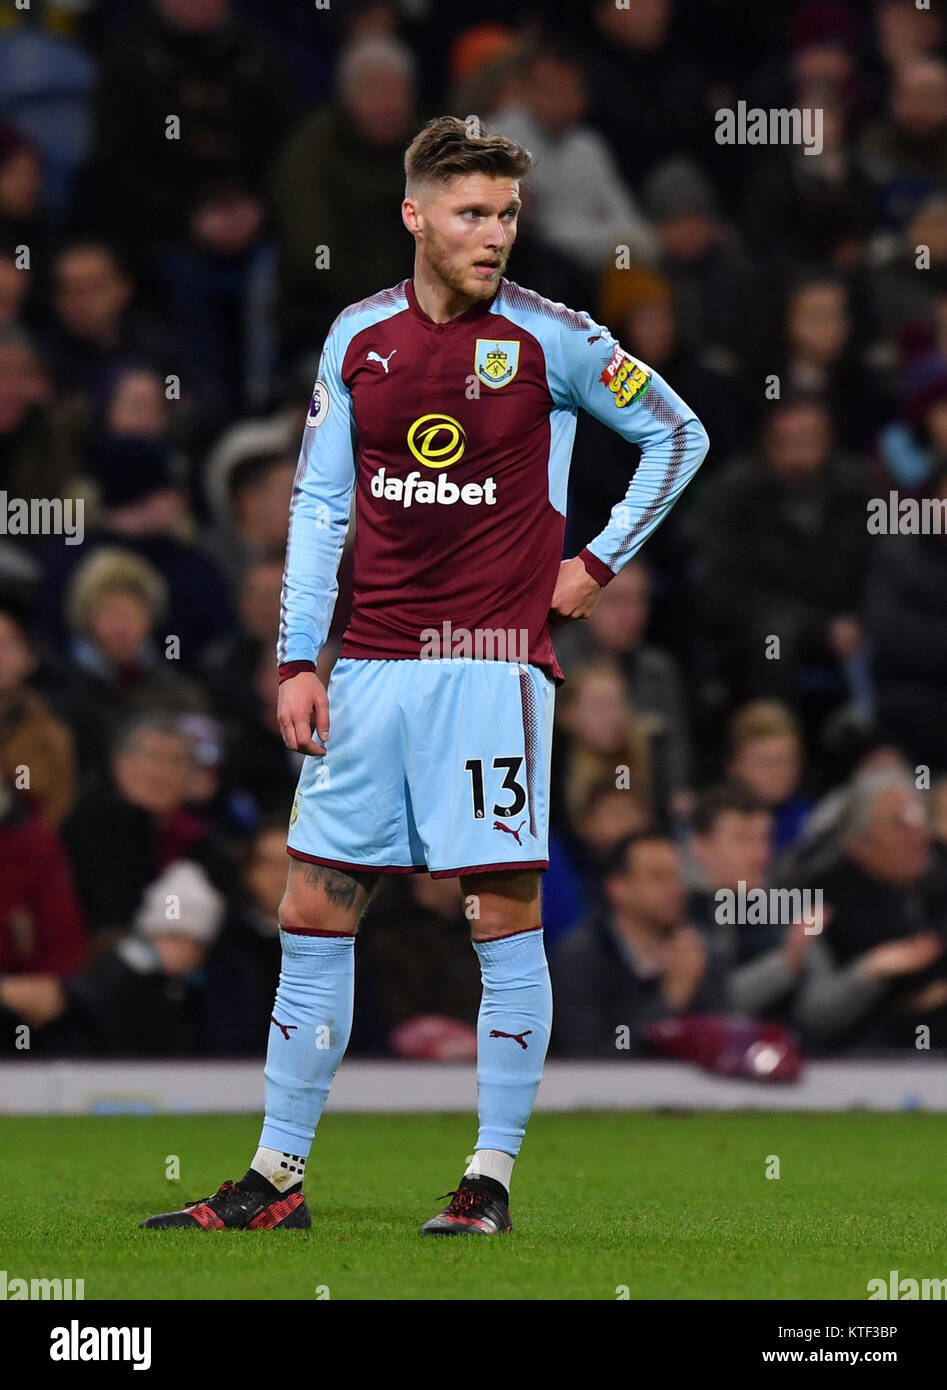 Burnley's Jeff Hendrick during the Premier League match at Turf Moor, Burnley. PRESS ASSOCIATION Photo. Picture date: Saturday December 23, 2017. See PA story SOCCER Burnley. Photo credit should read: Anthony Devlin/PA Wire. RESTRICTIONS: EDITORIAL USE ONLY No use with unauthorised audio, video, data, fixture lists, club/league logos or 'live' services. Online in-match use limited to 75 images, no video emulation. No use in betting, games or single club/league/player publications. Stock Photo